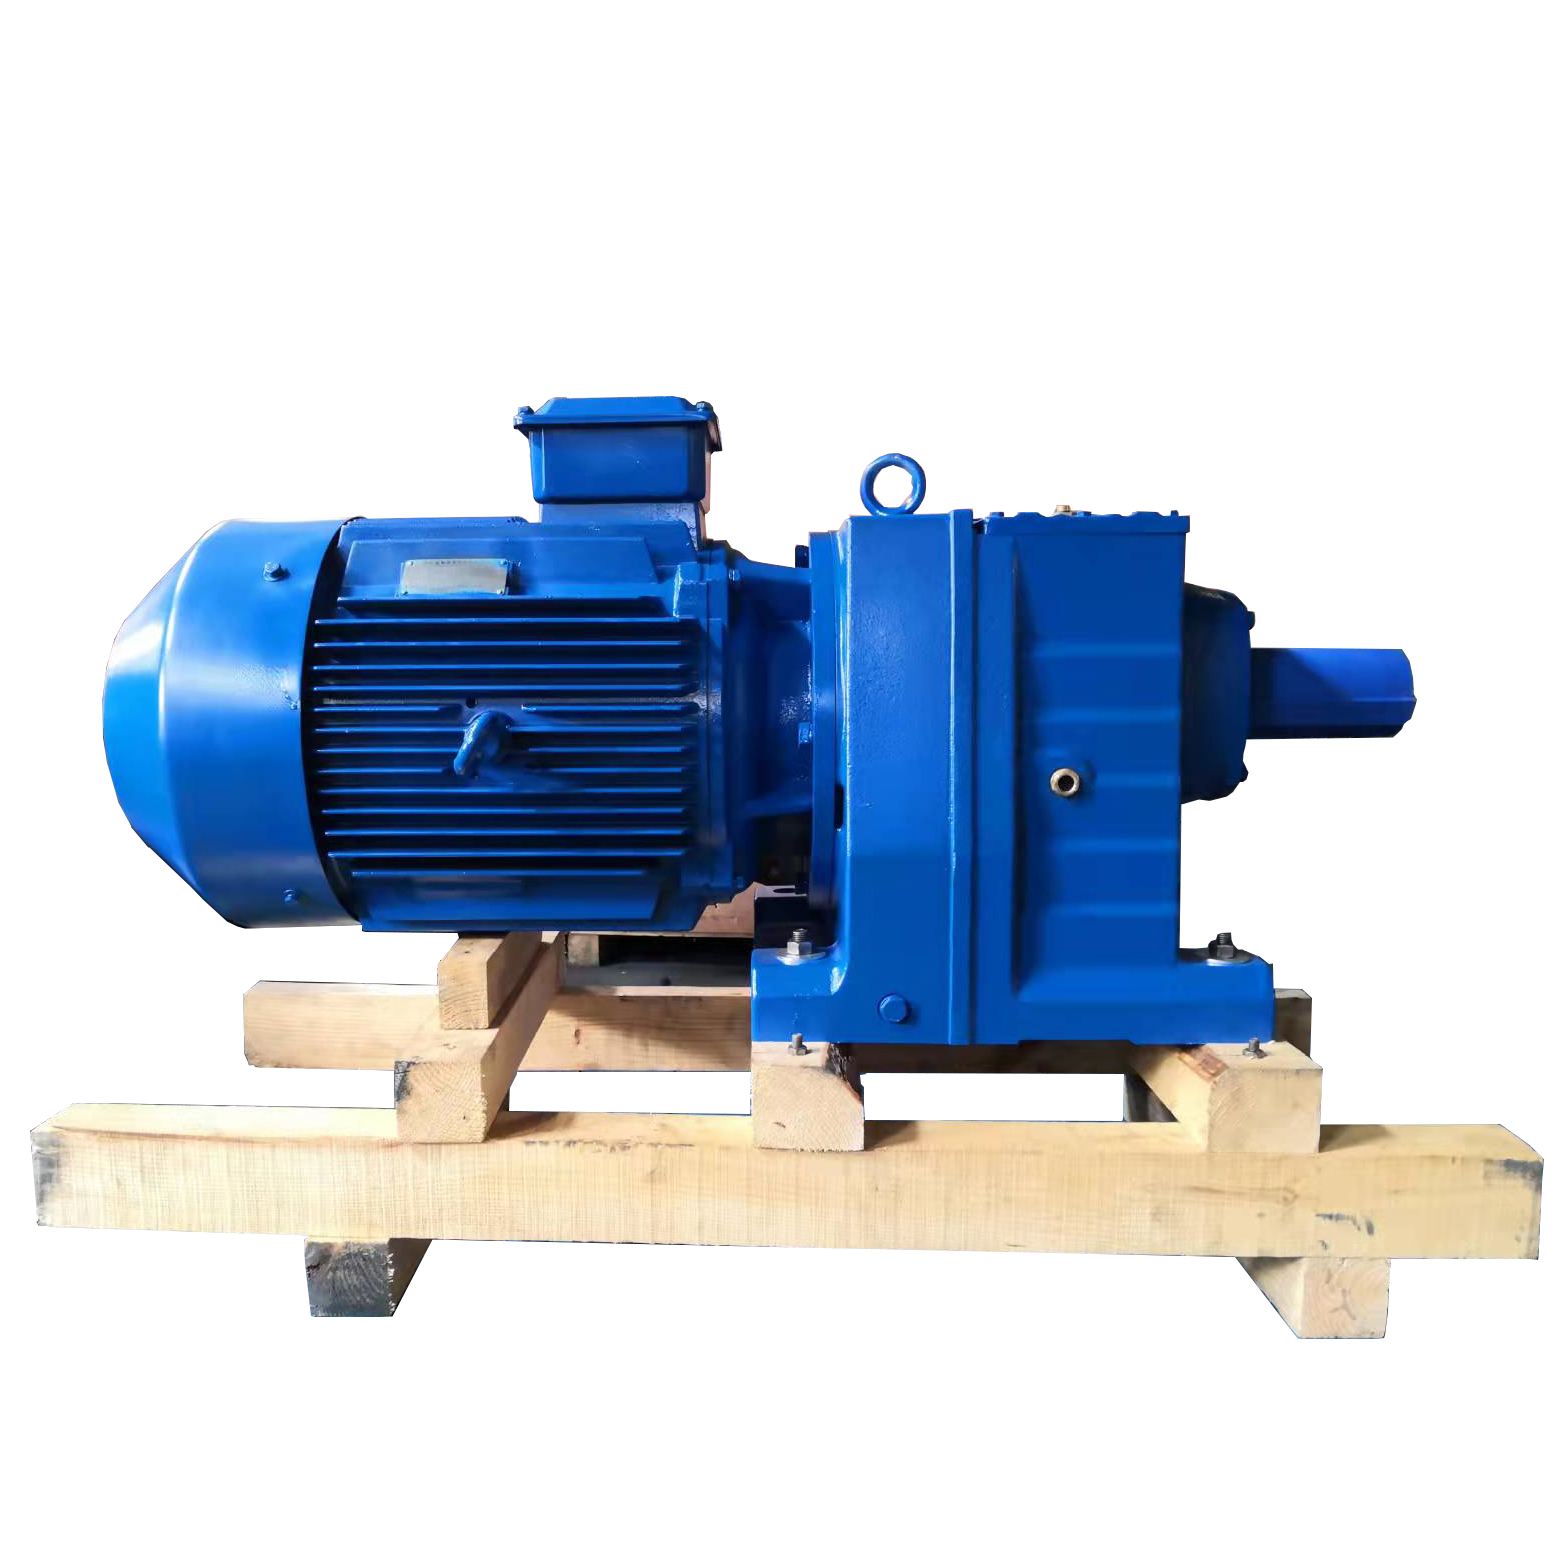 EVERGEAR DRIVE Inline shaft 3 phase electric motor with gearbox R series coaxial speed reducer